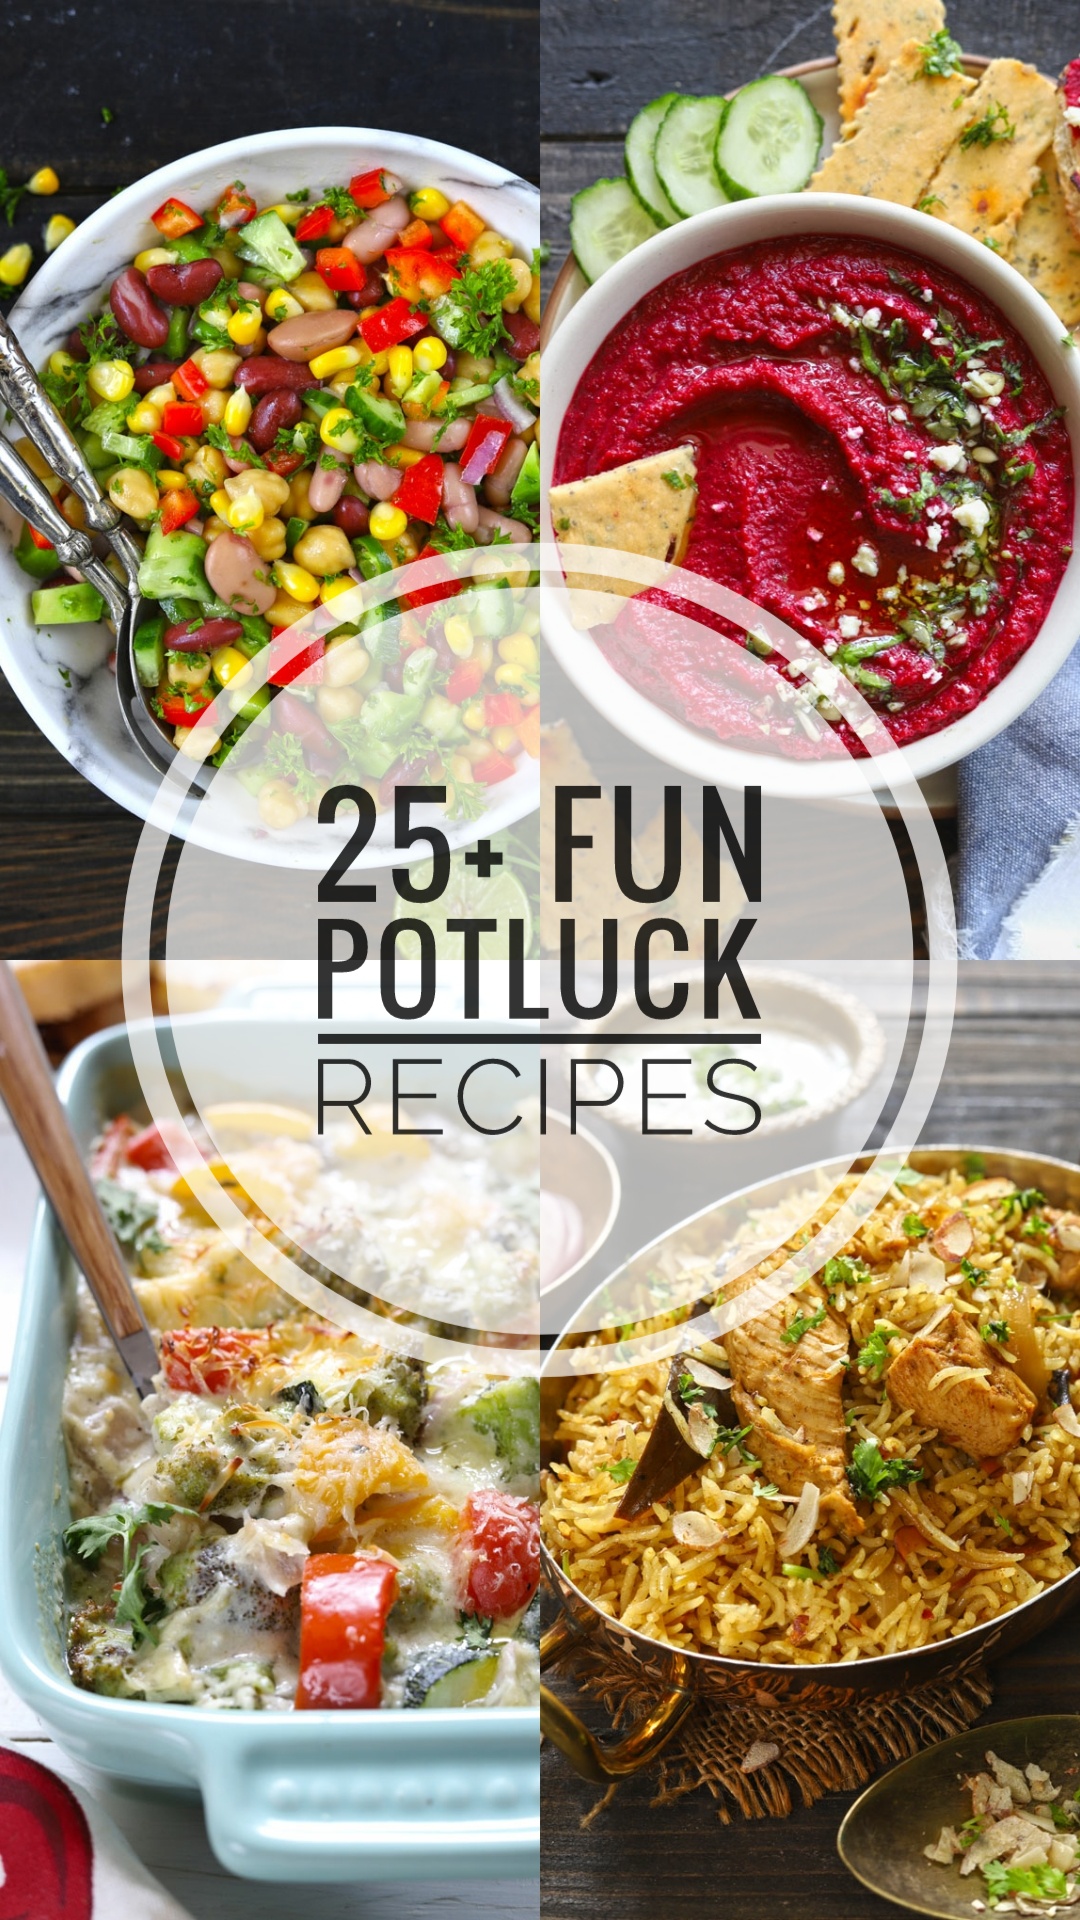 How To Host A Potluck: 40 Potluck Ideas Tips And Themes Boissons Saines ...